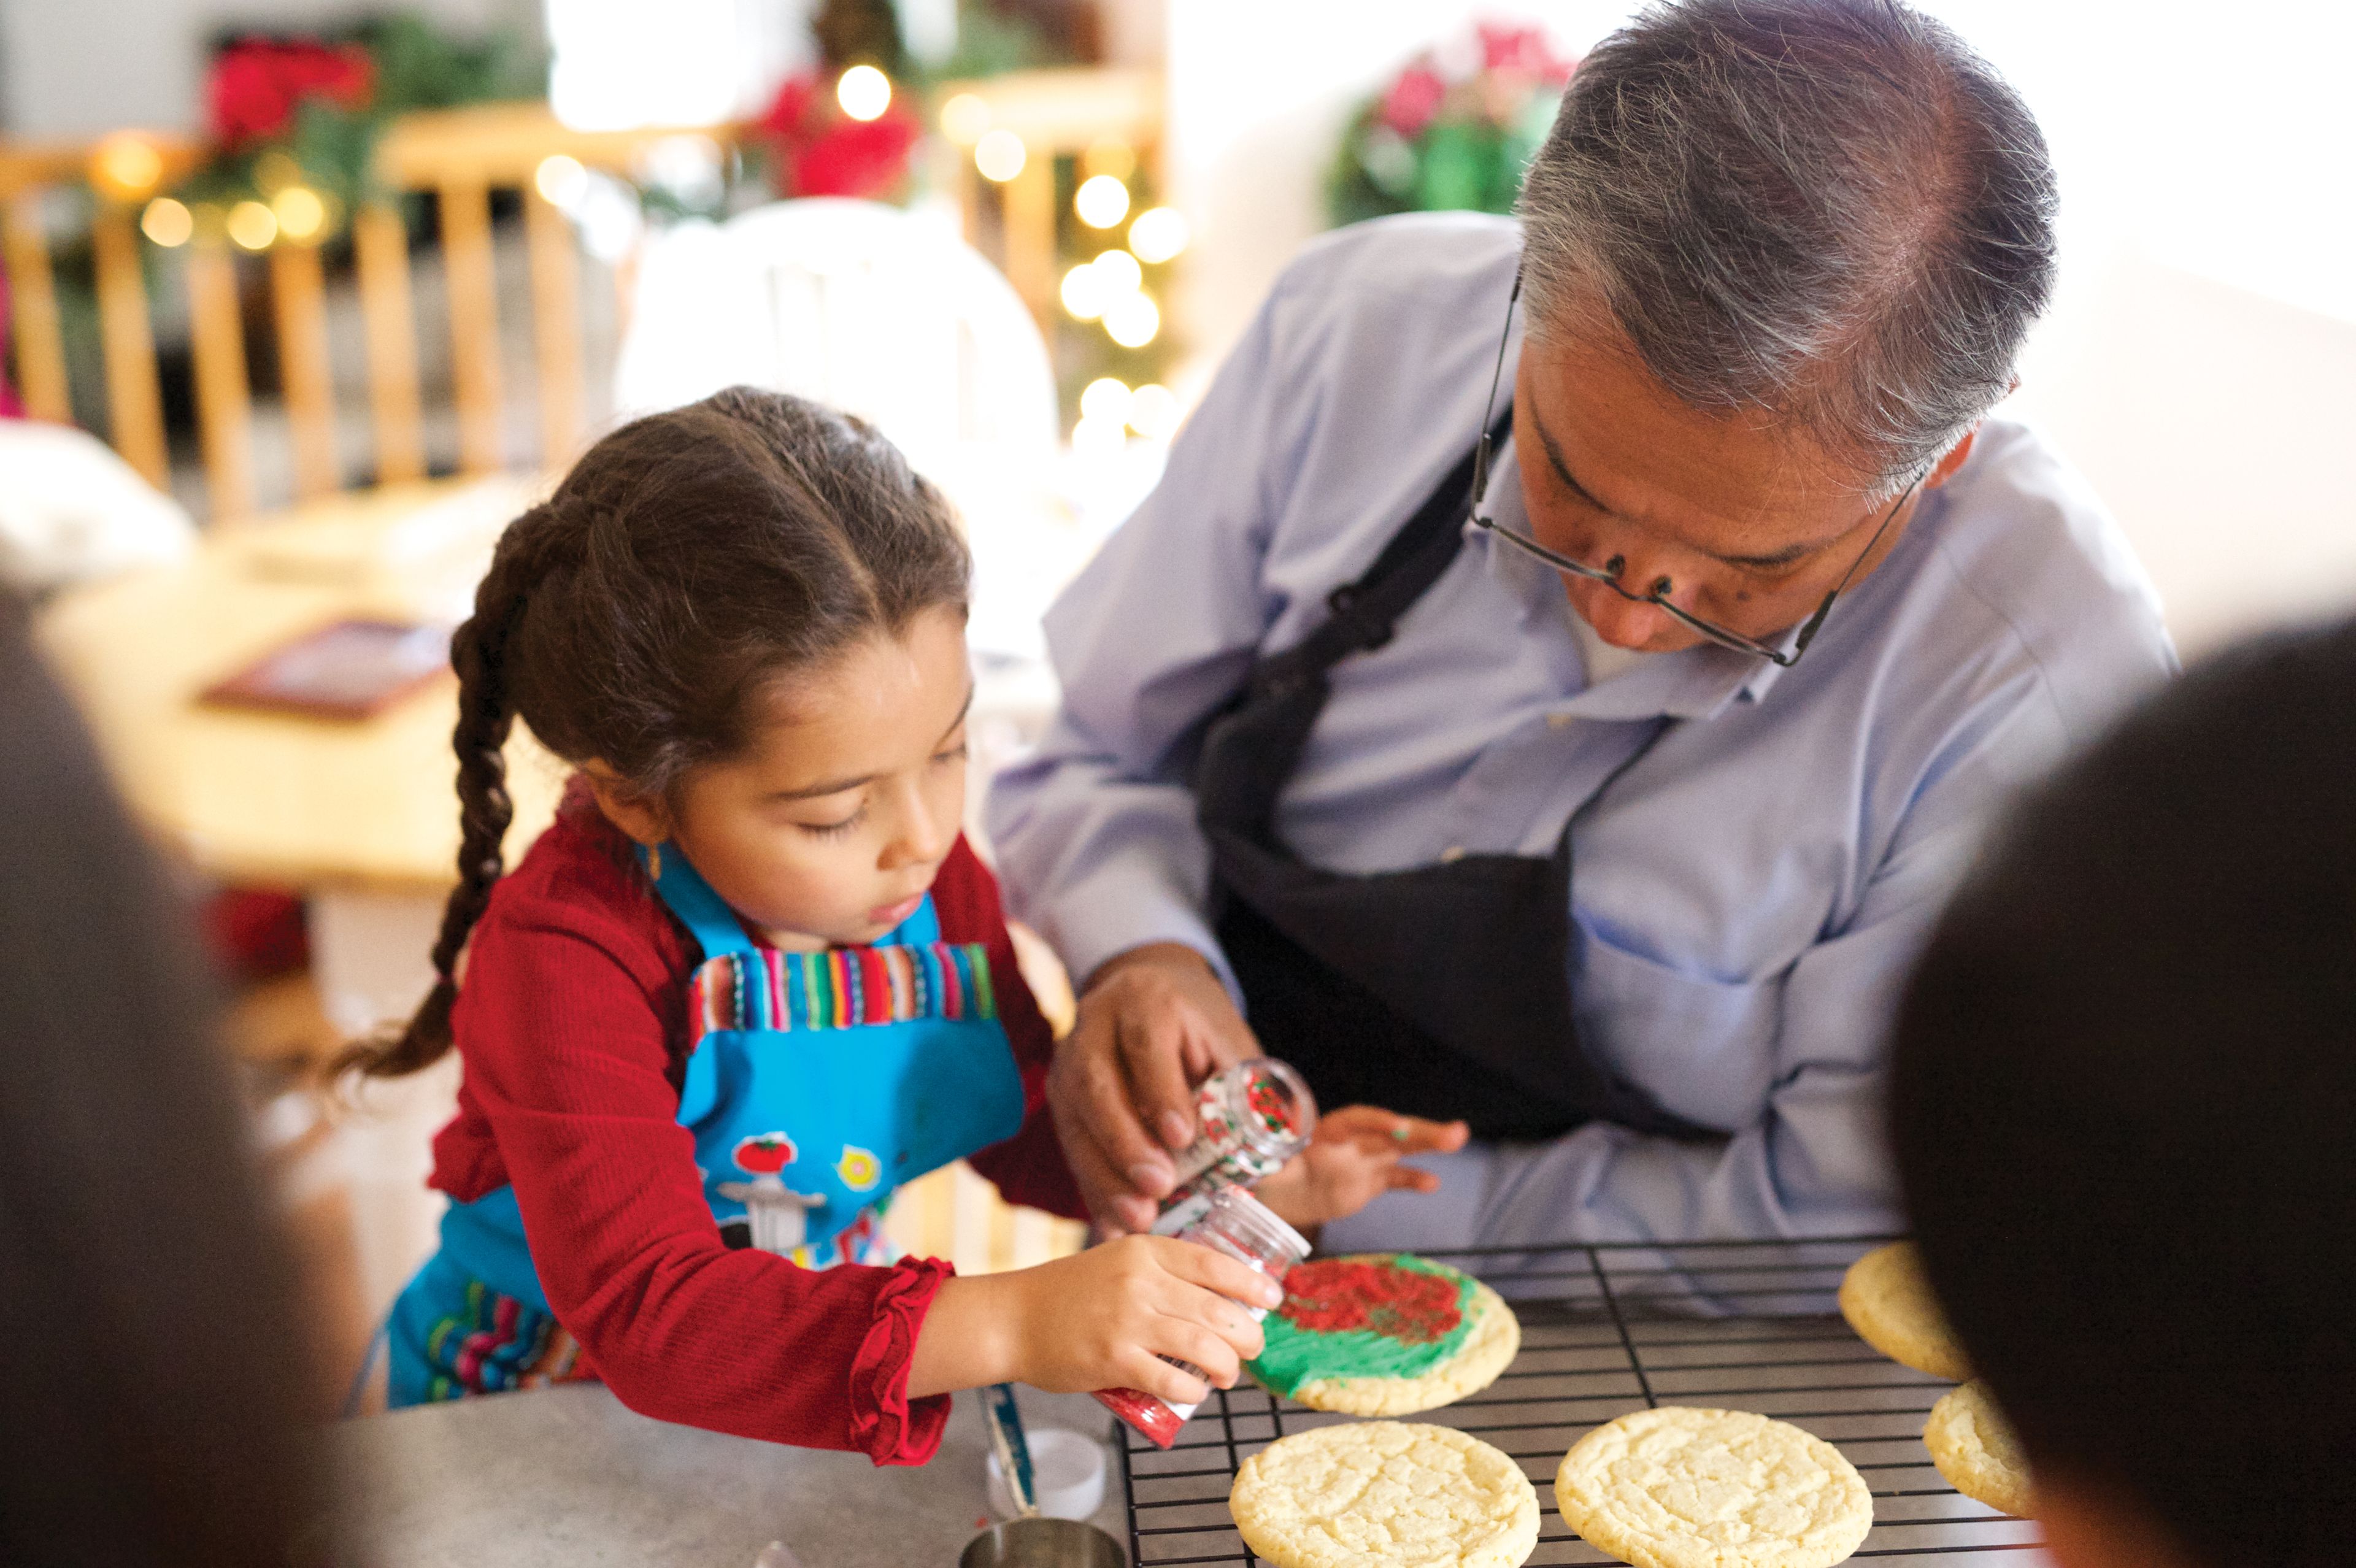 A grandfather decorates Christmas sugar cookies with his granddaughter.